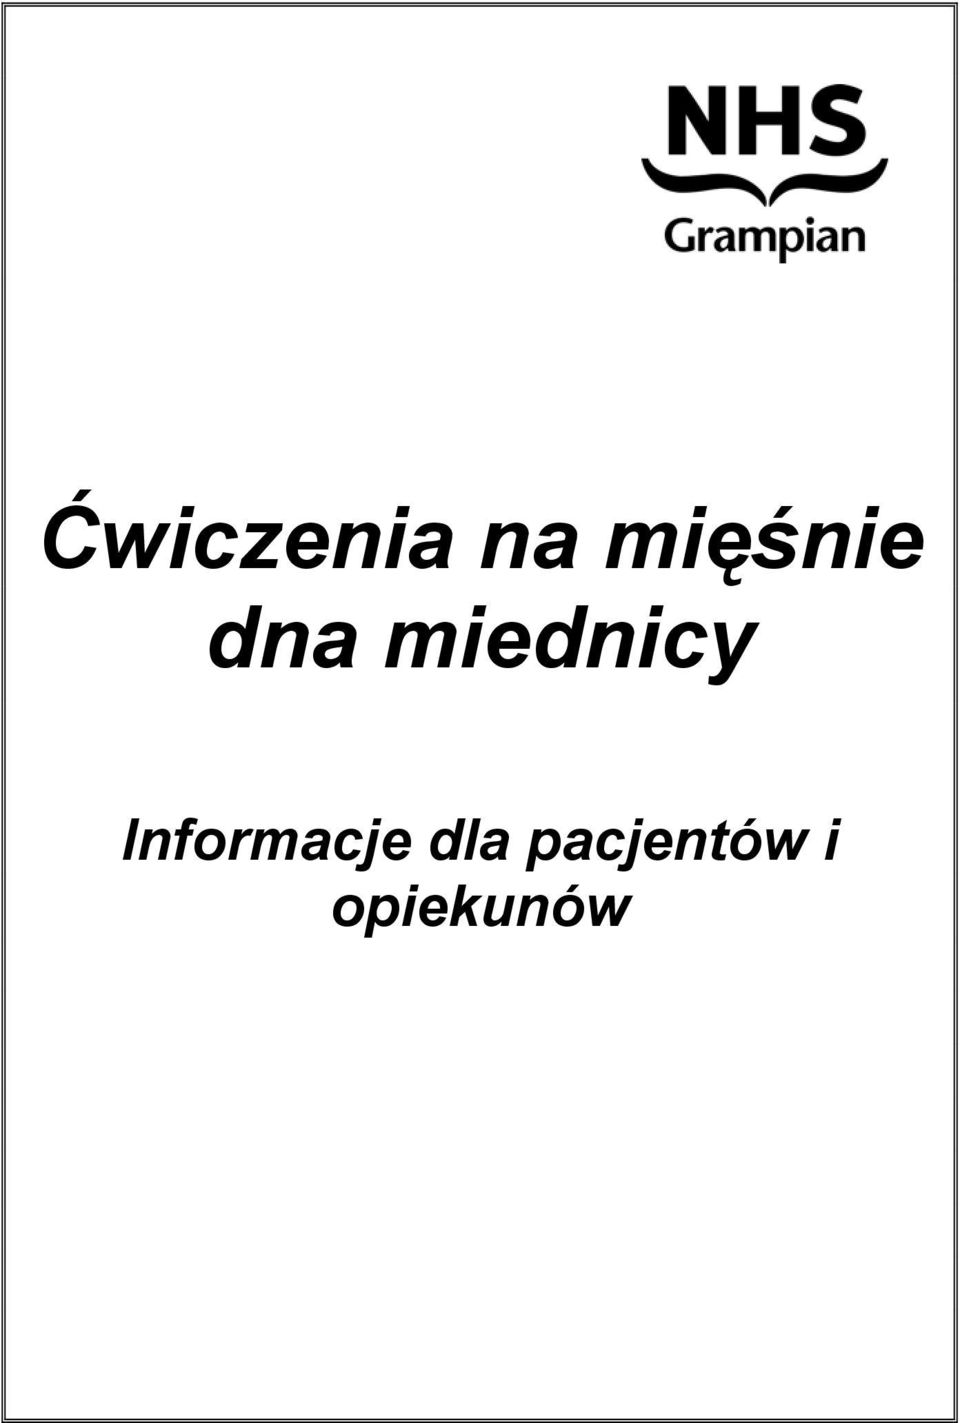 miednicy